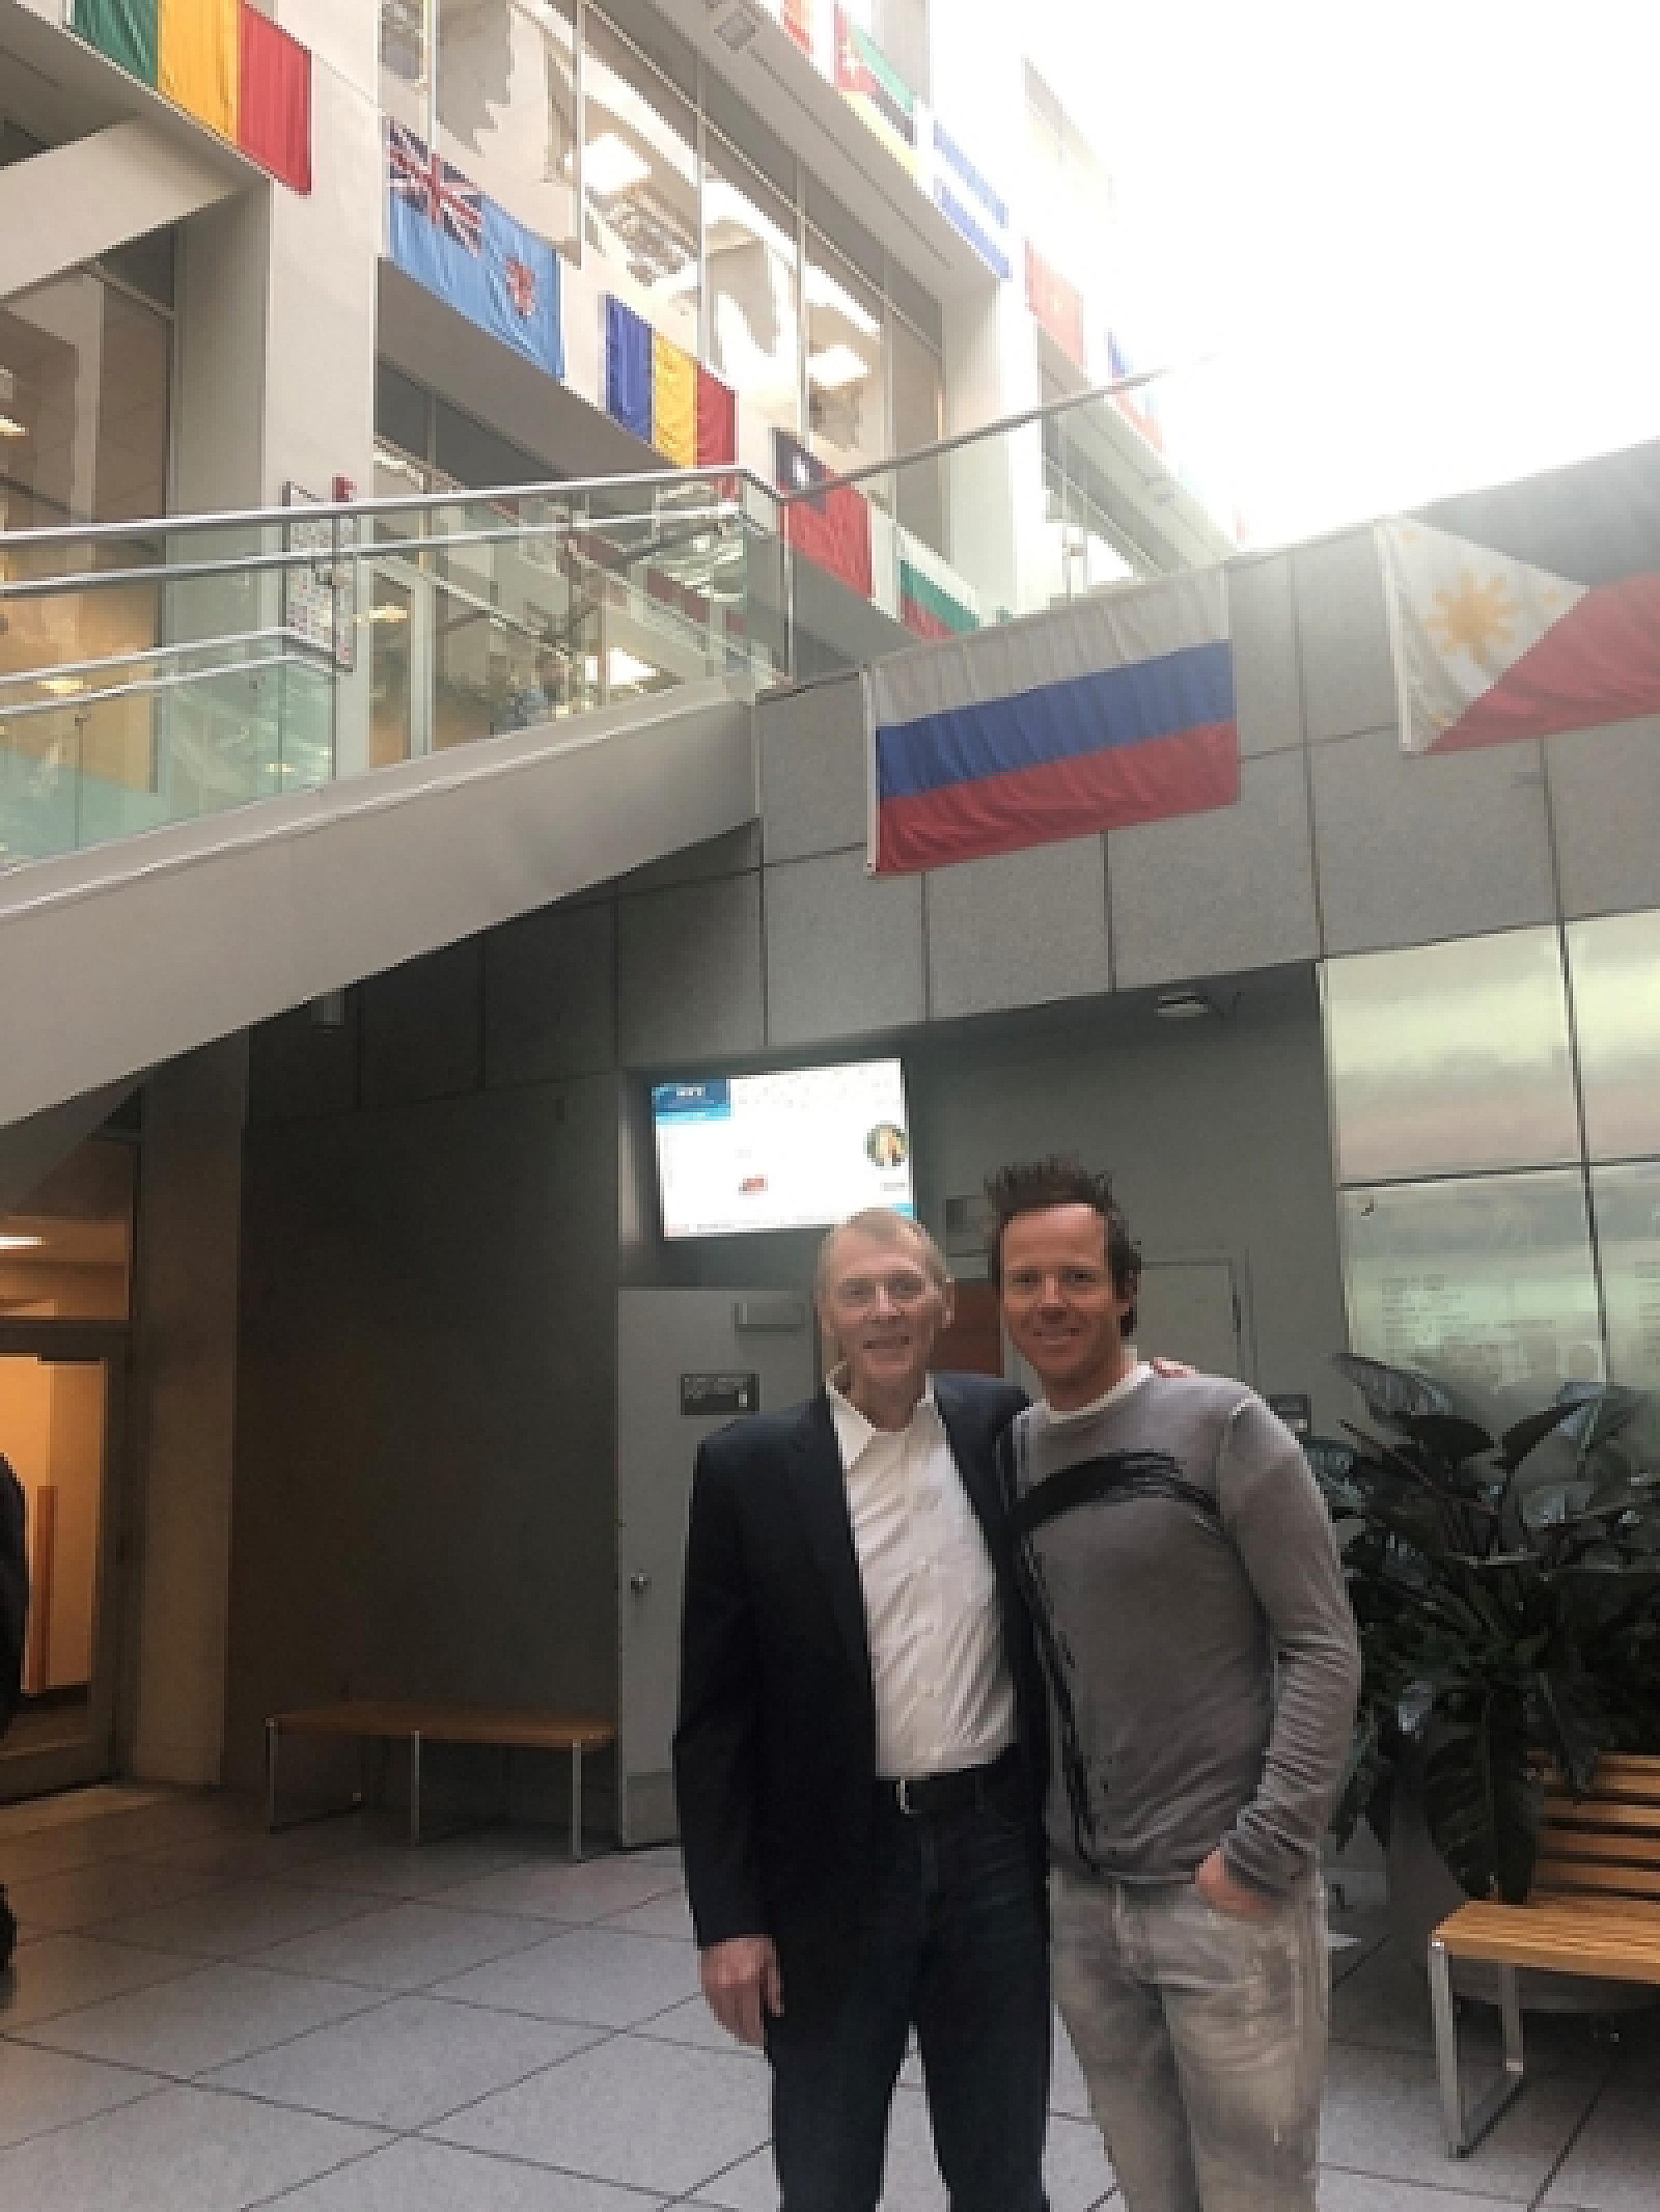 Ryan Smith and his dad, Scott Smith, in BYU Tanner building